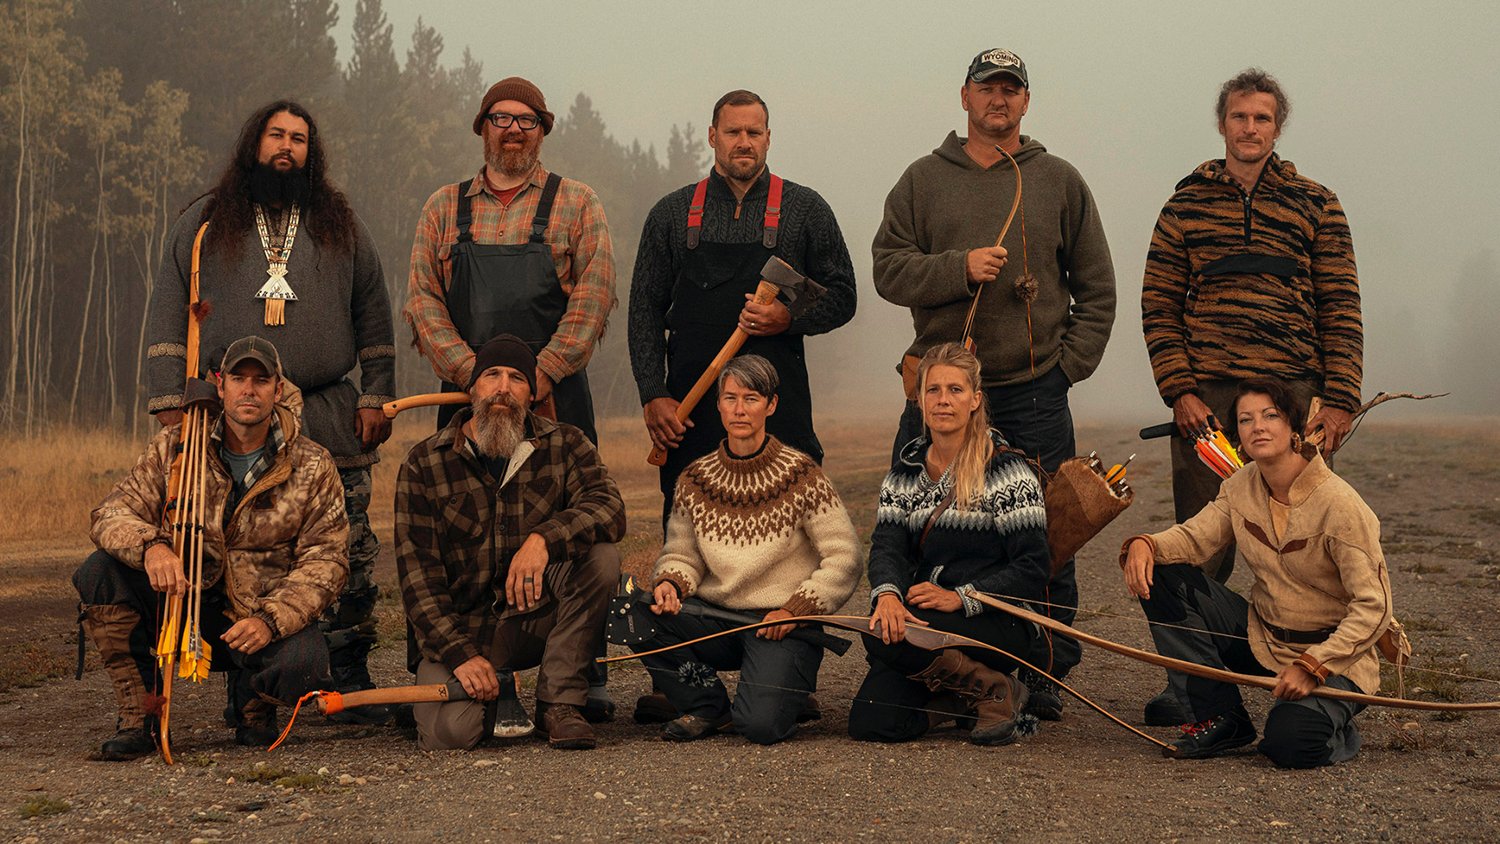 The History Channel's 'Alone' Season 8 cast, representing the survival skills needed for the show